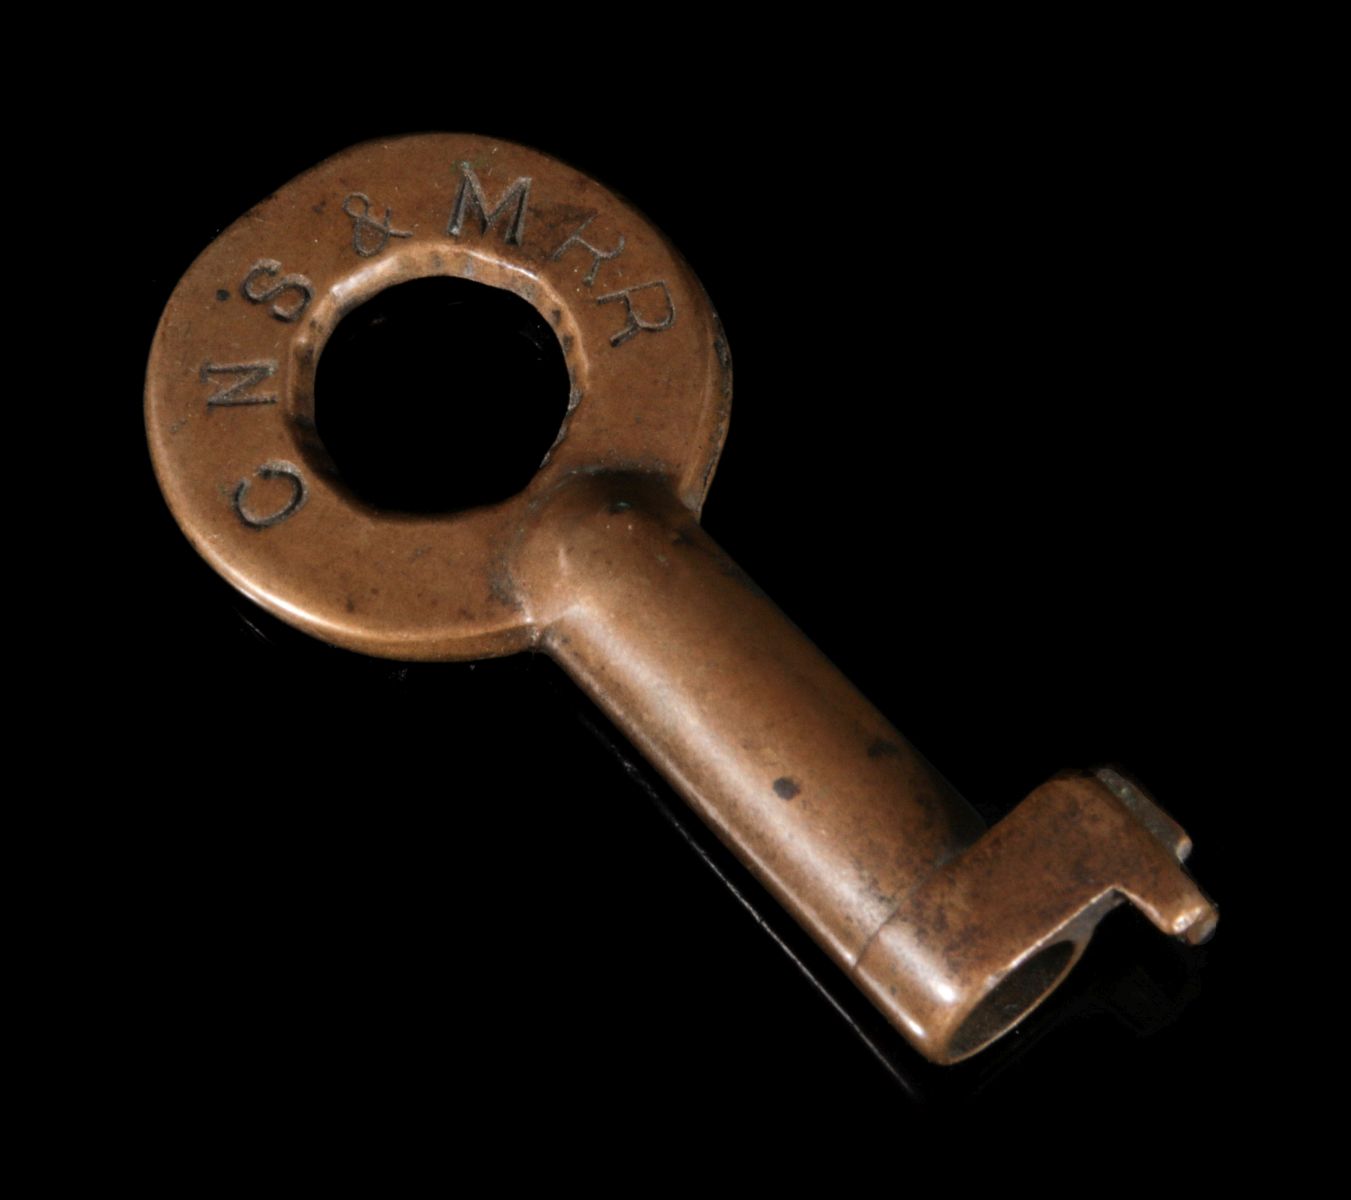 A CHICAGO NORTH SHORE AND MILWAUKEE RR SWITCH KEY